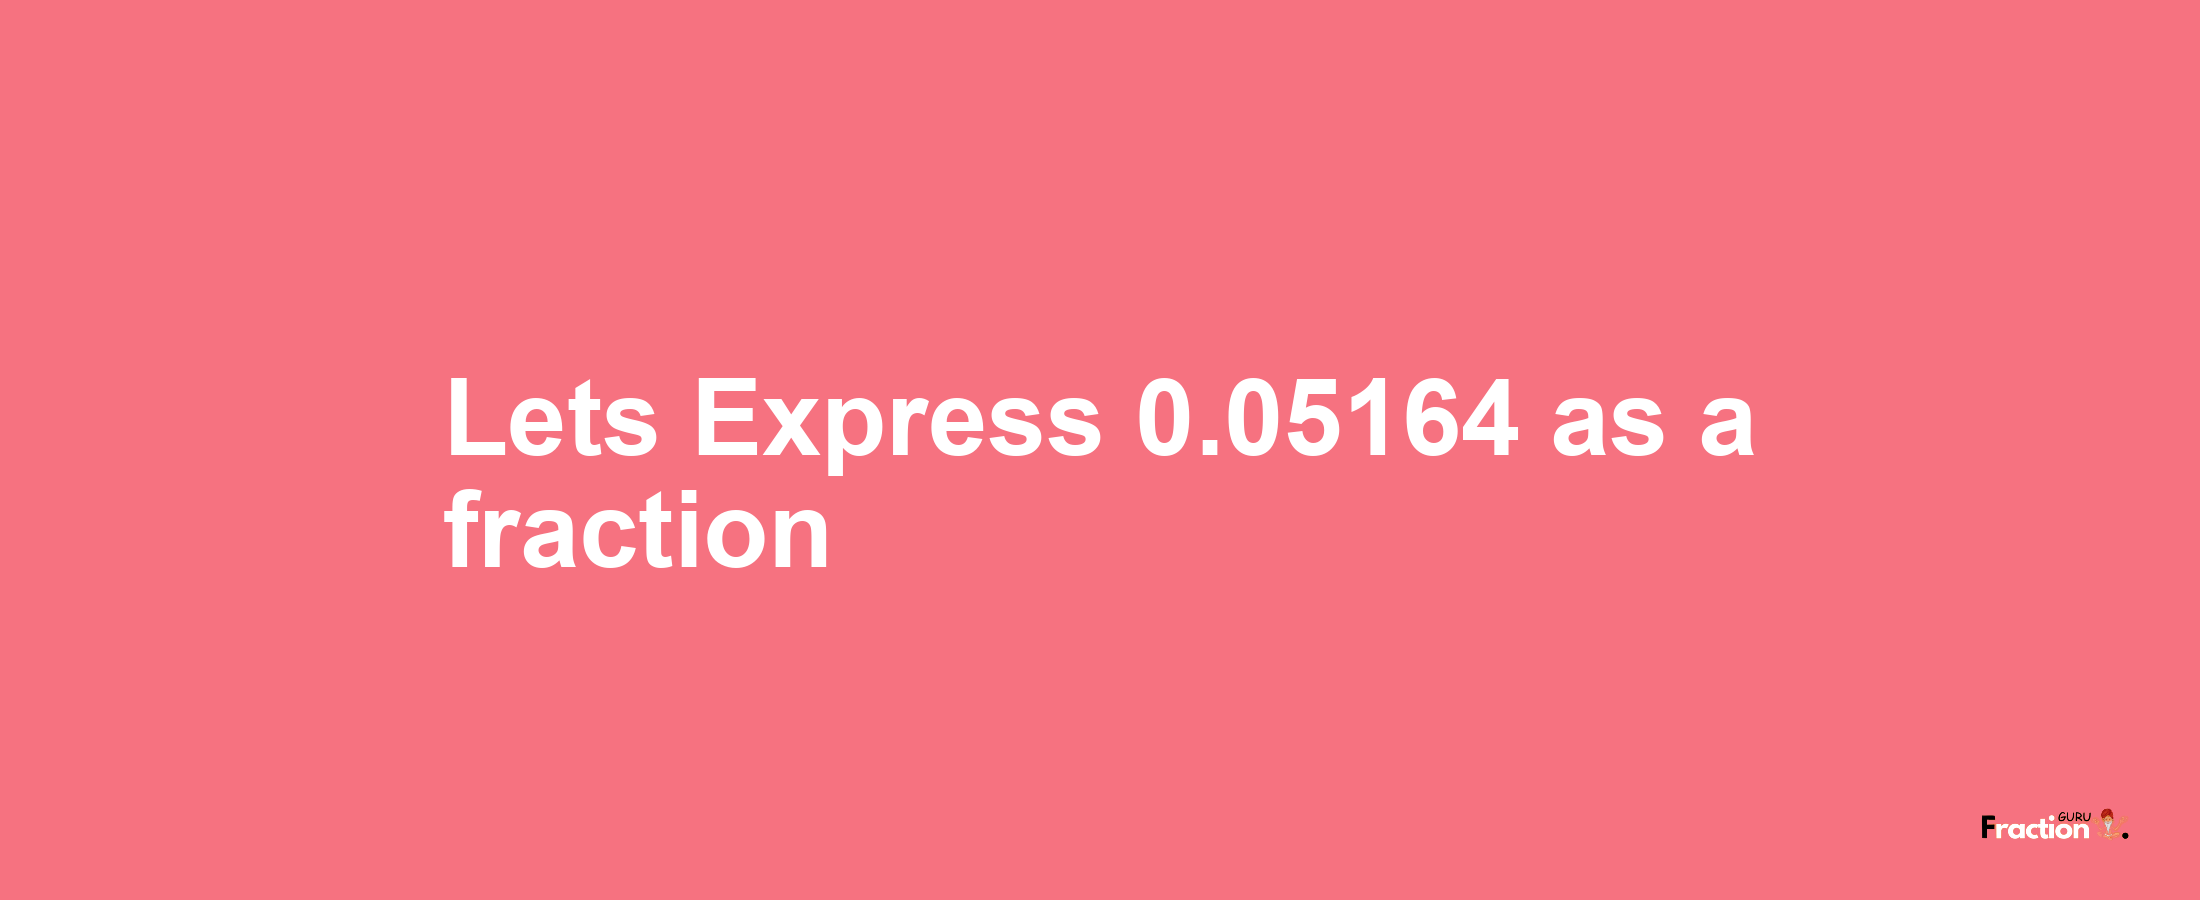 Lets Express 0.05164 as afraction